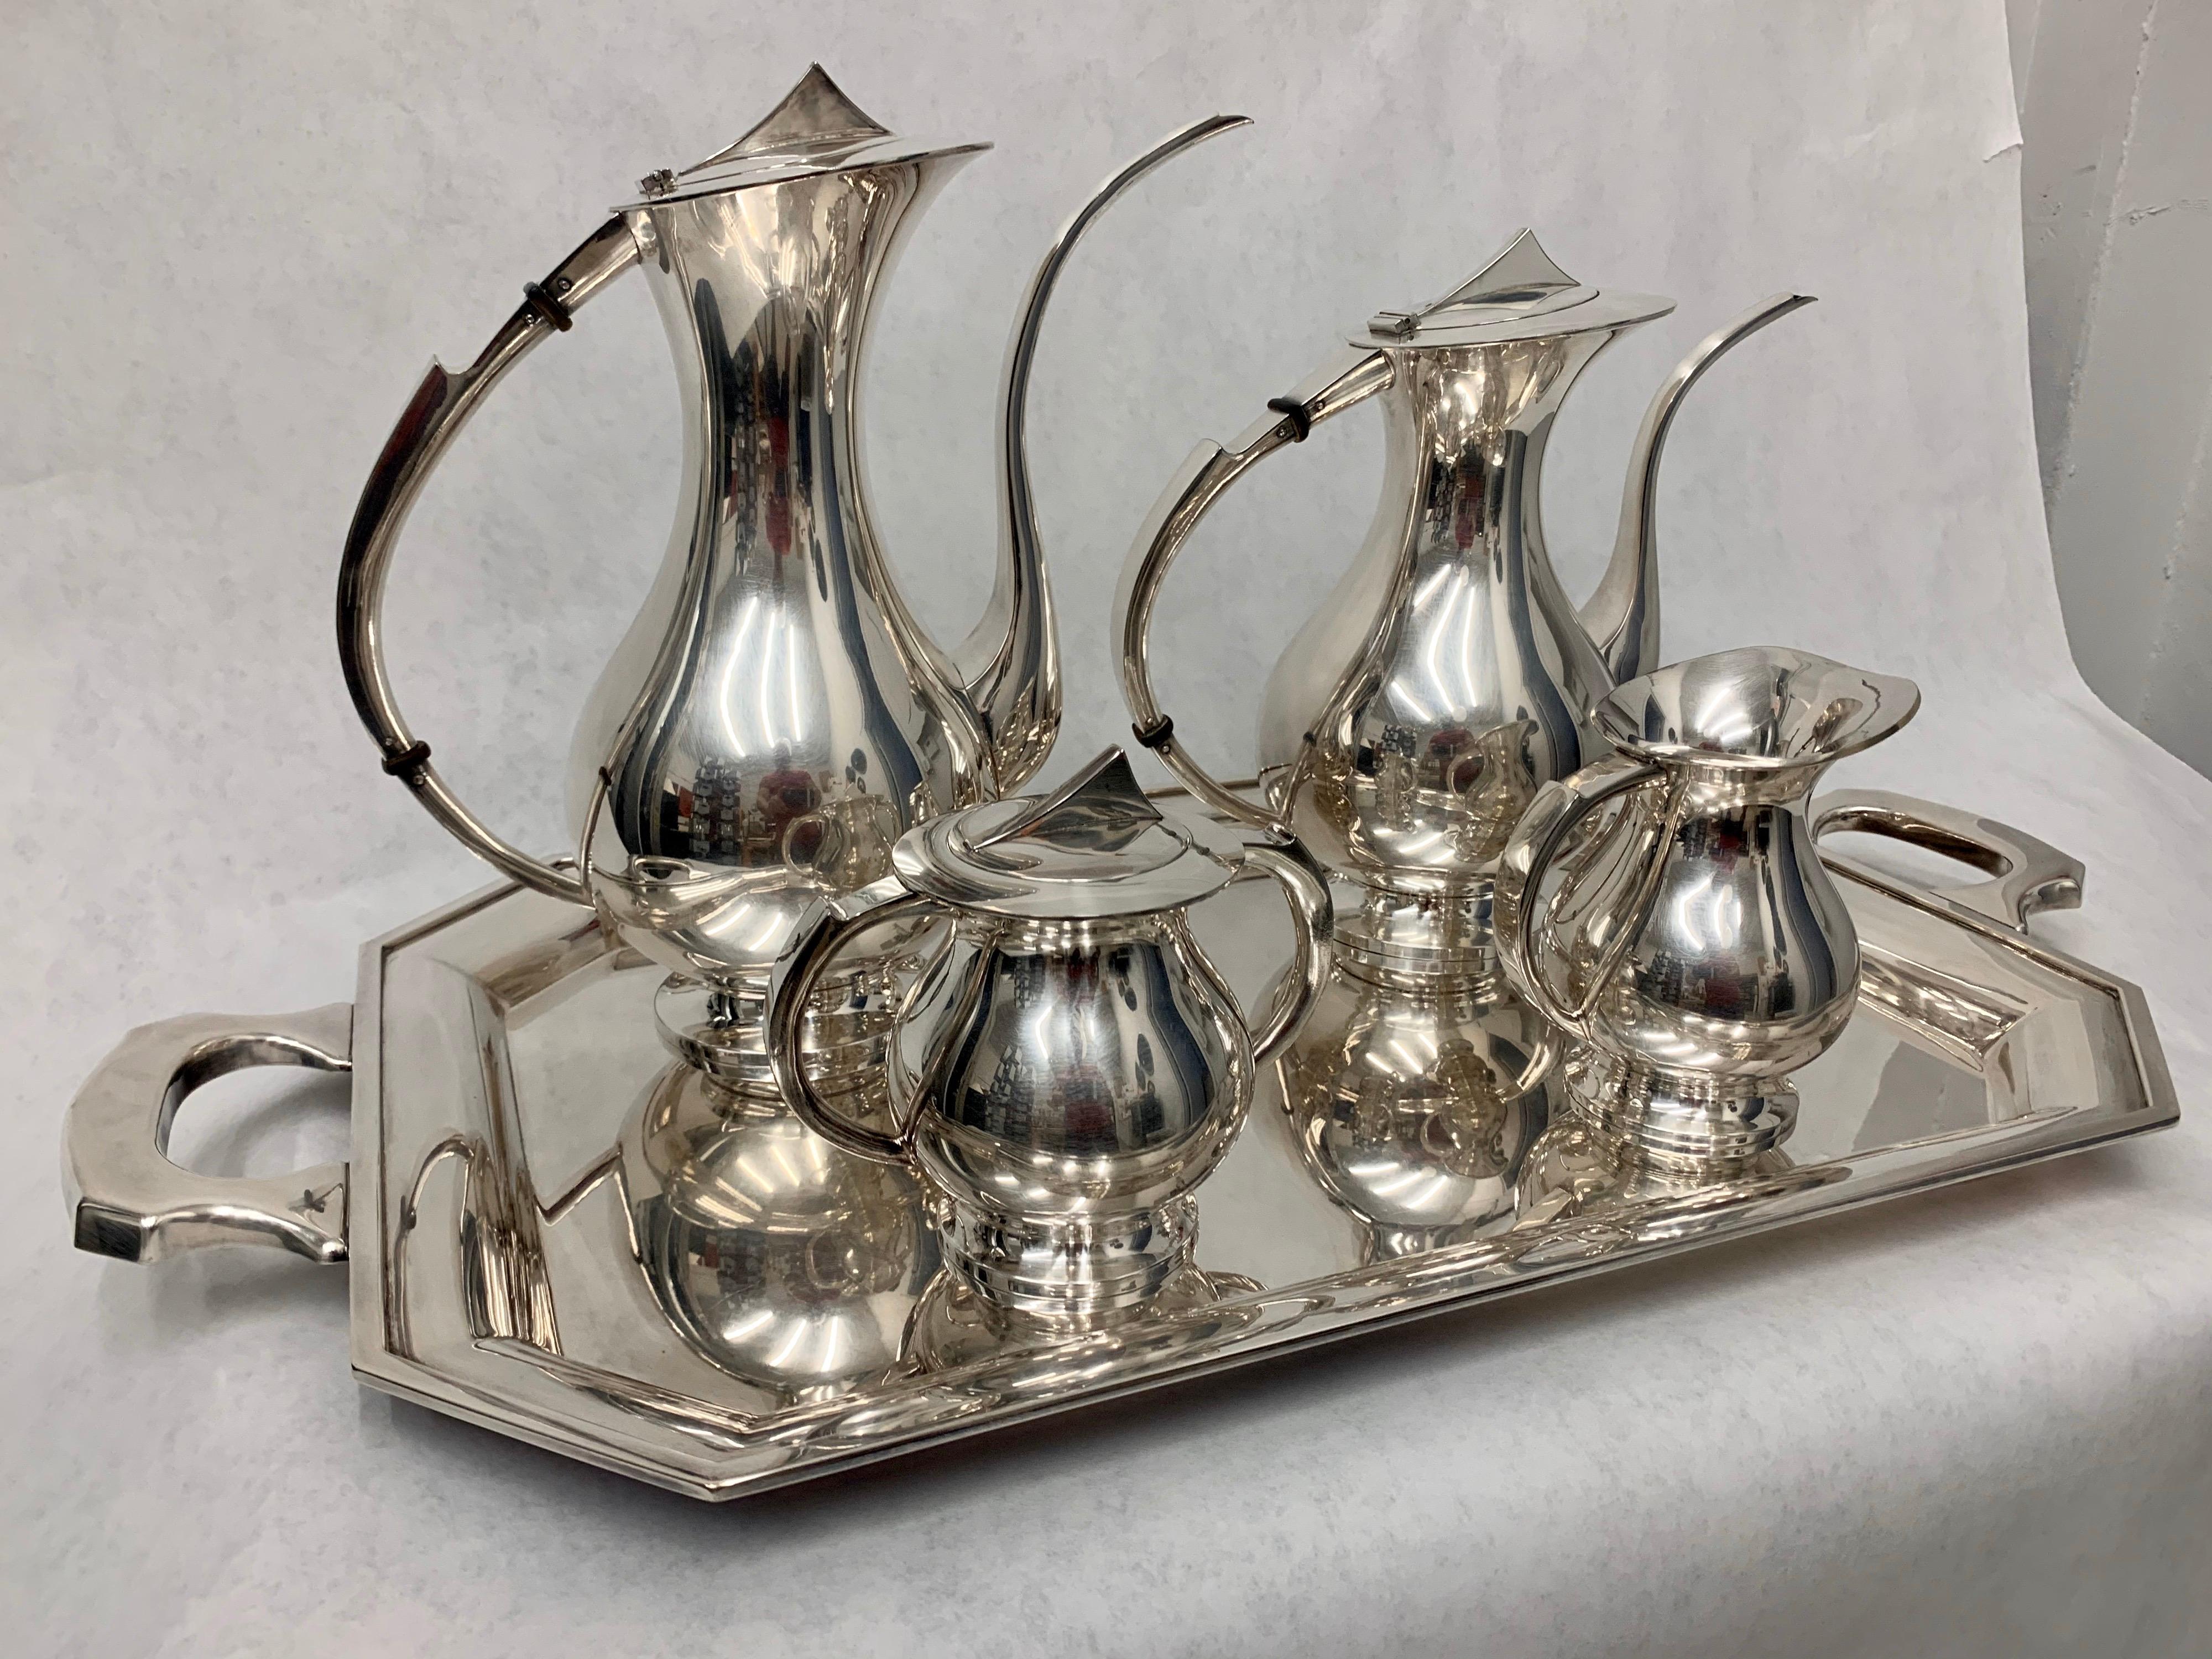 Japanese silver plated 5-piece coffee or tea set
Dimensions:
Serving tray, 26.5 wide, 14.5 deep, 1 inch tall
Larger coffee pot, 11.75 inches tall, 12.5 deep, 5.5 wide
Smaller tea pot, 10 inches tall, 11.5 deep, 5.5 wide
Creamer, 5.25 tall, 5,25